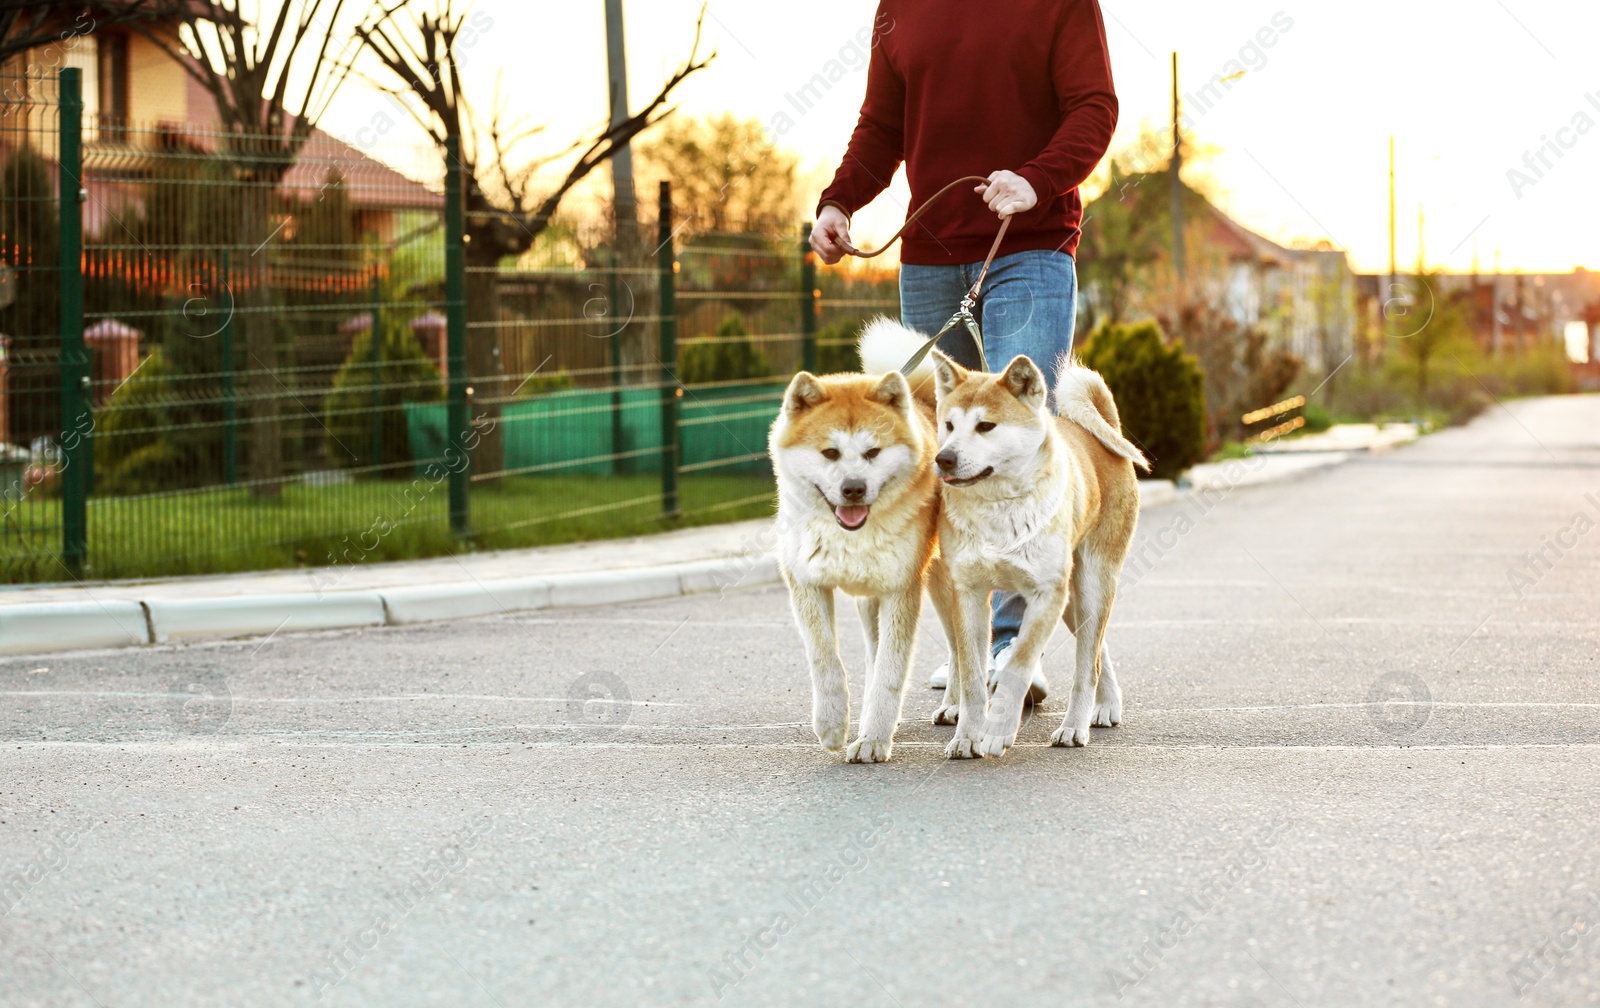 Photo of Young man walking his adorable Akita Inu dogs outdoors